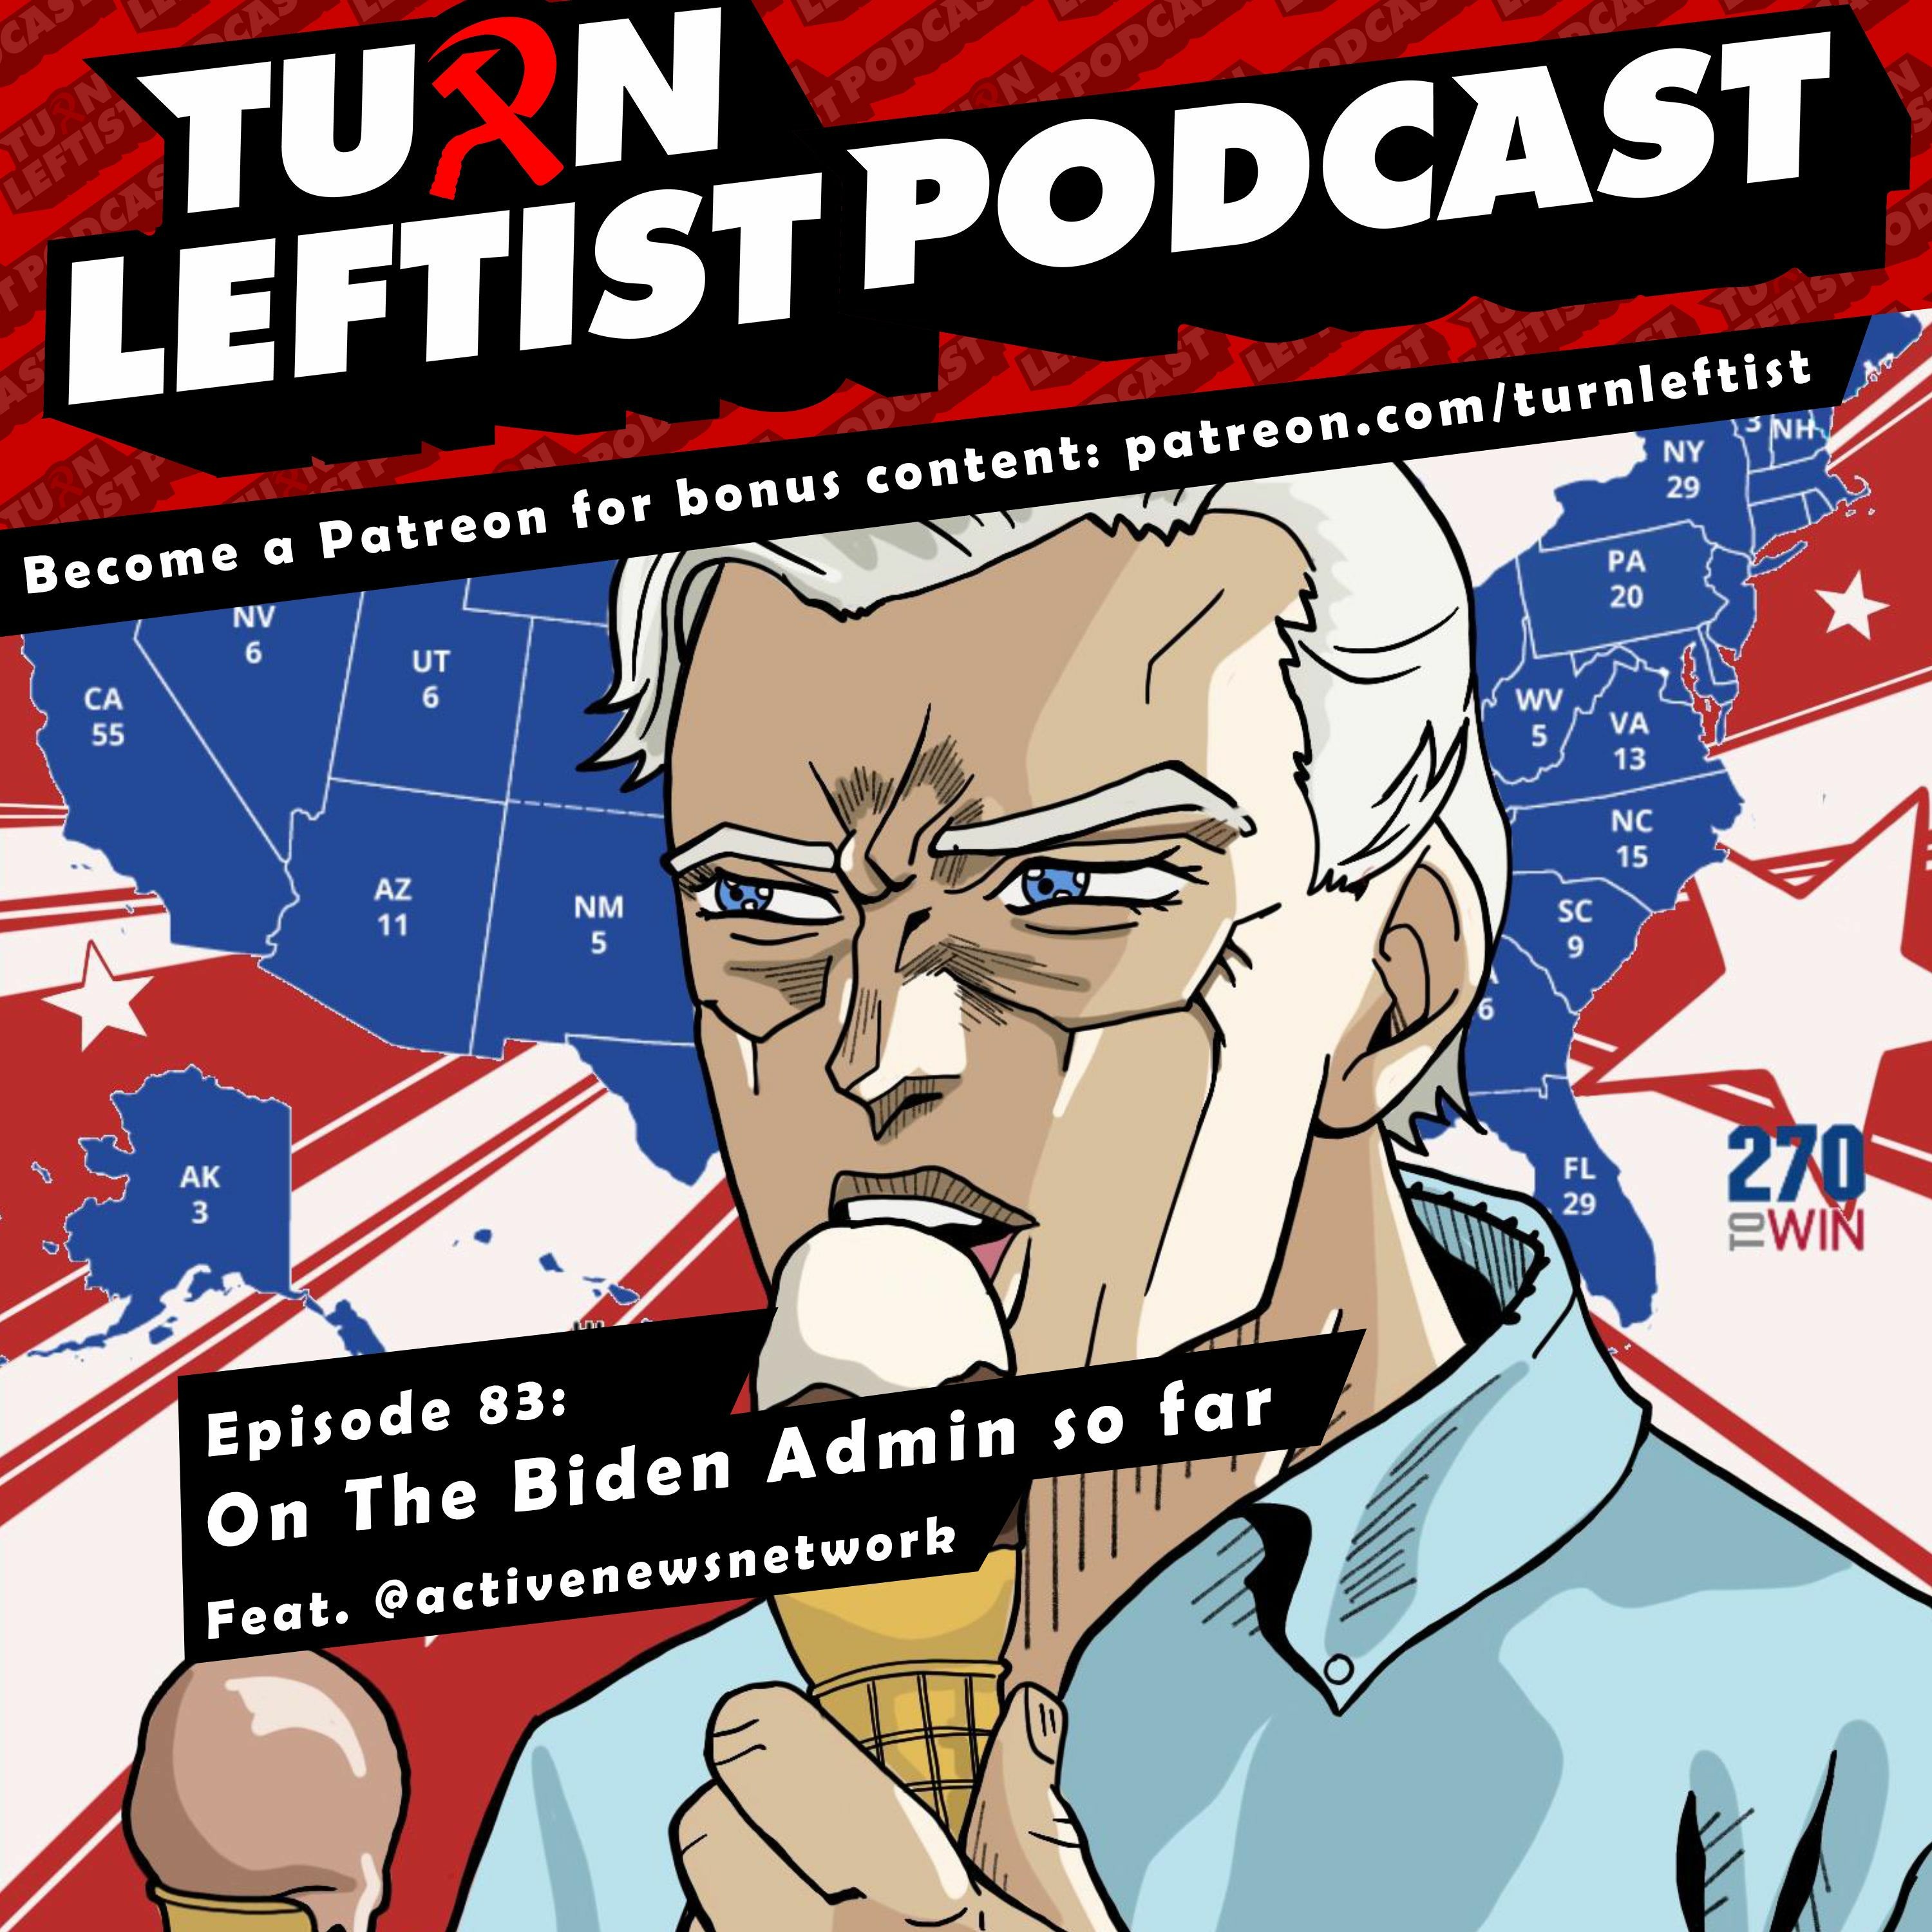 083: On The Biden Admin with Ryan from Activist News Network